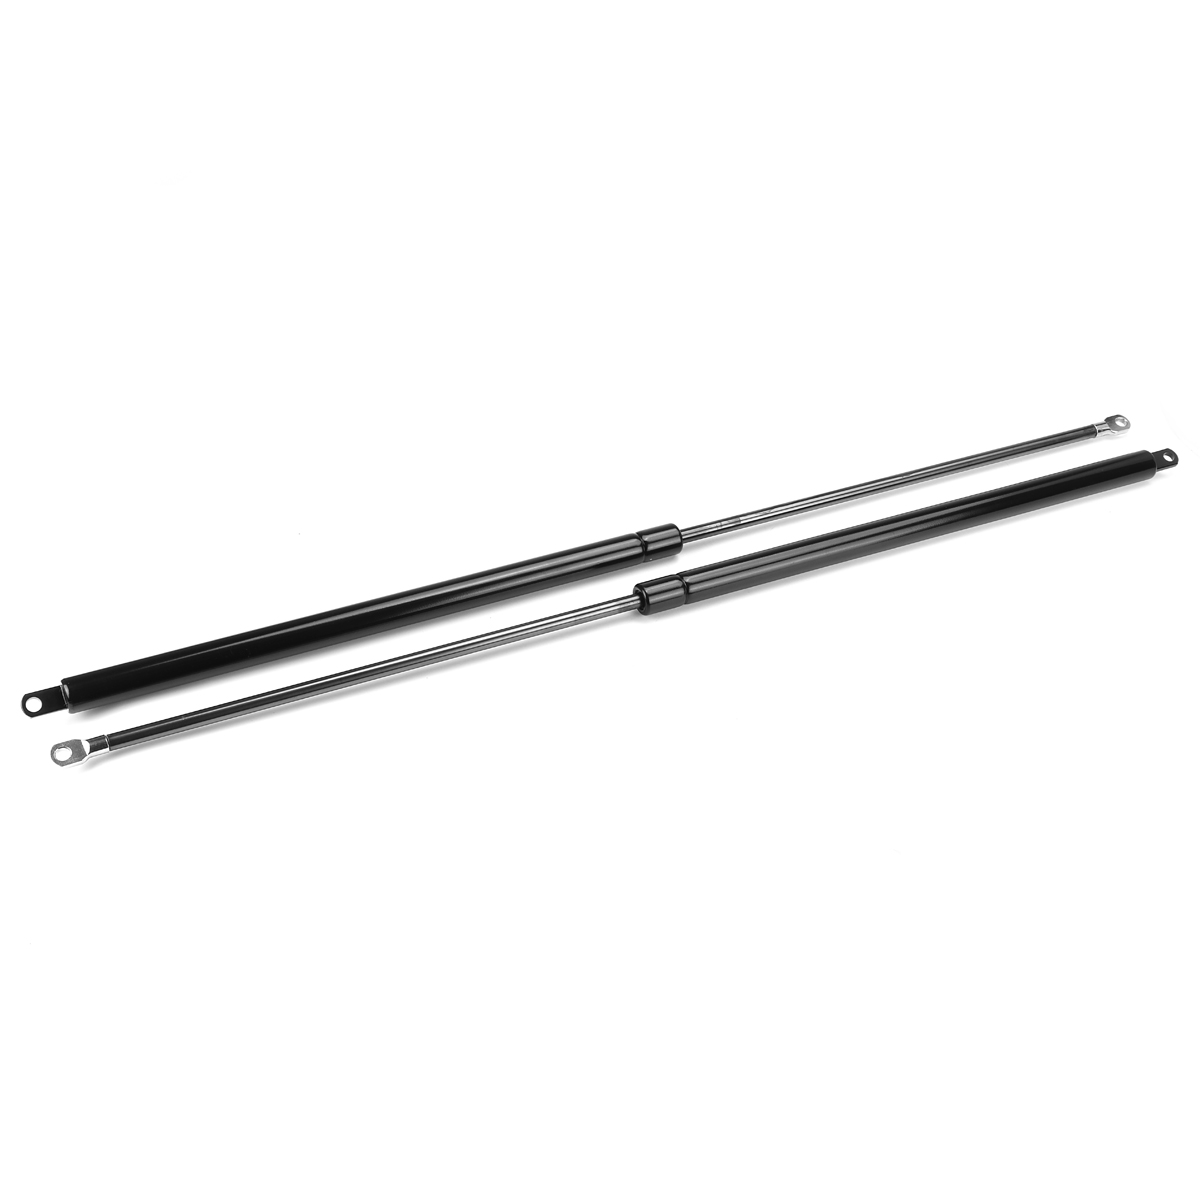 2Pcs-310-810mm-Extended-100-350-Compressed-Universal-800N-Force-Gas-Springs-Struts-Lifters-Supports--1777718-11